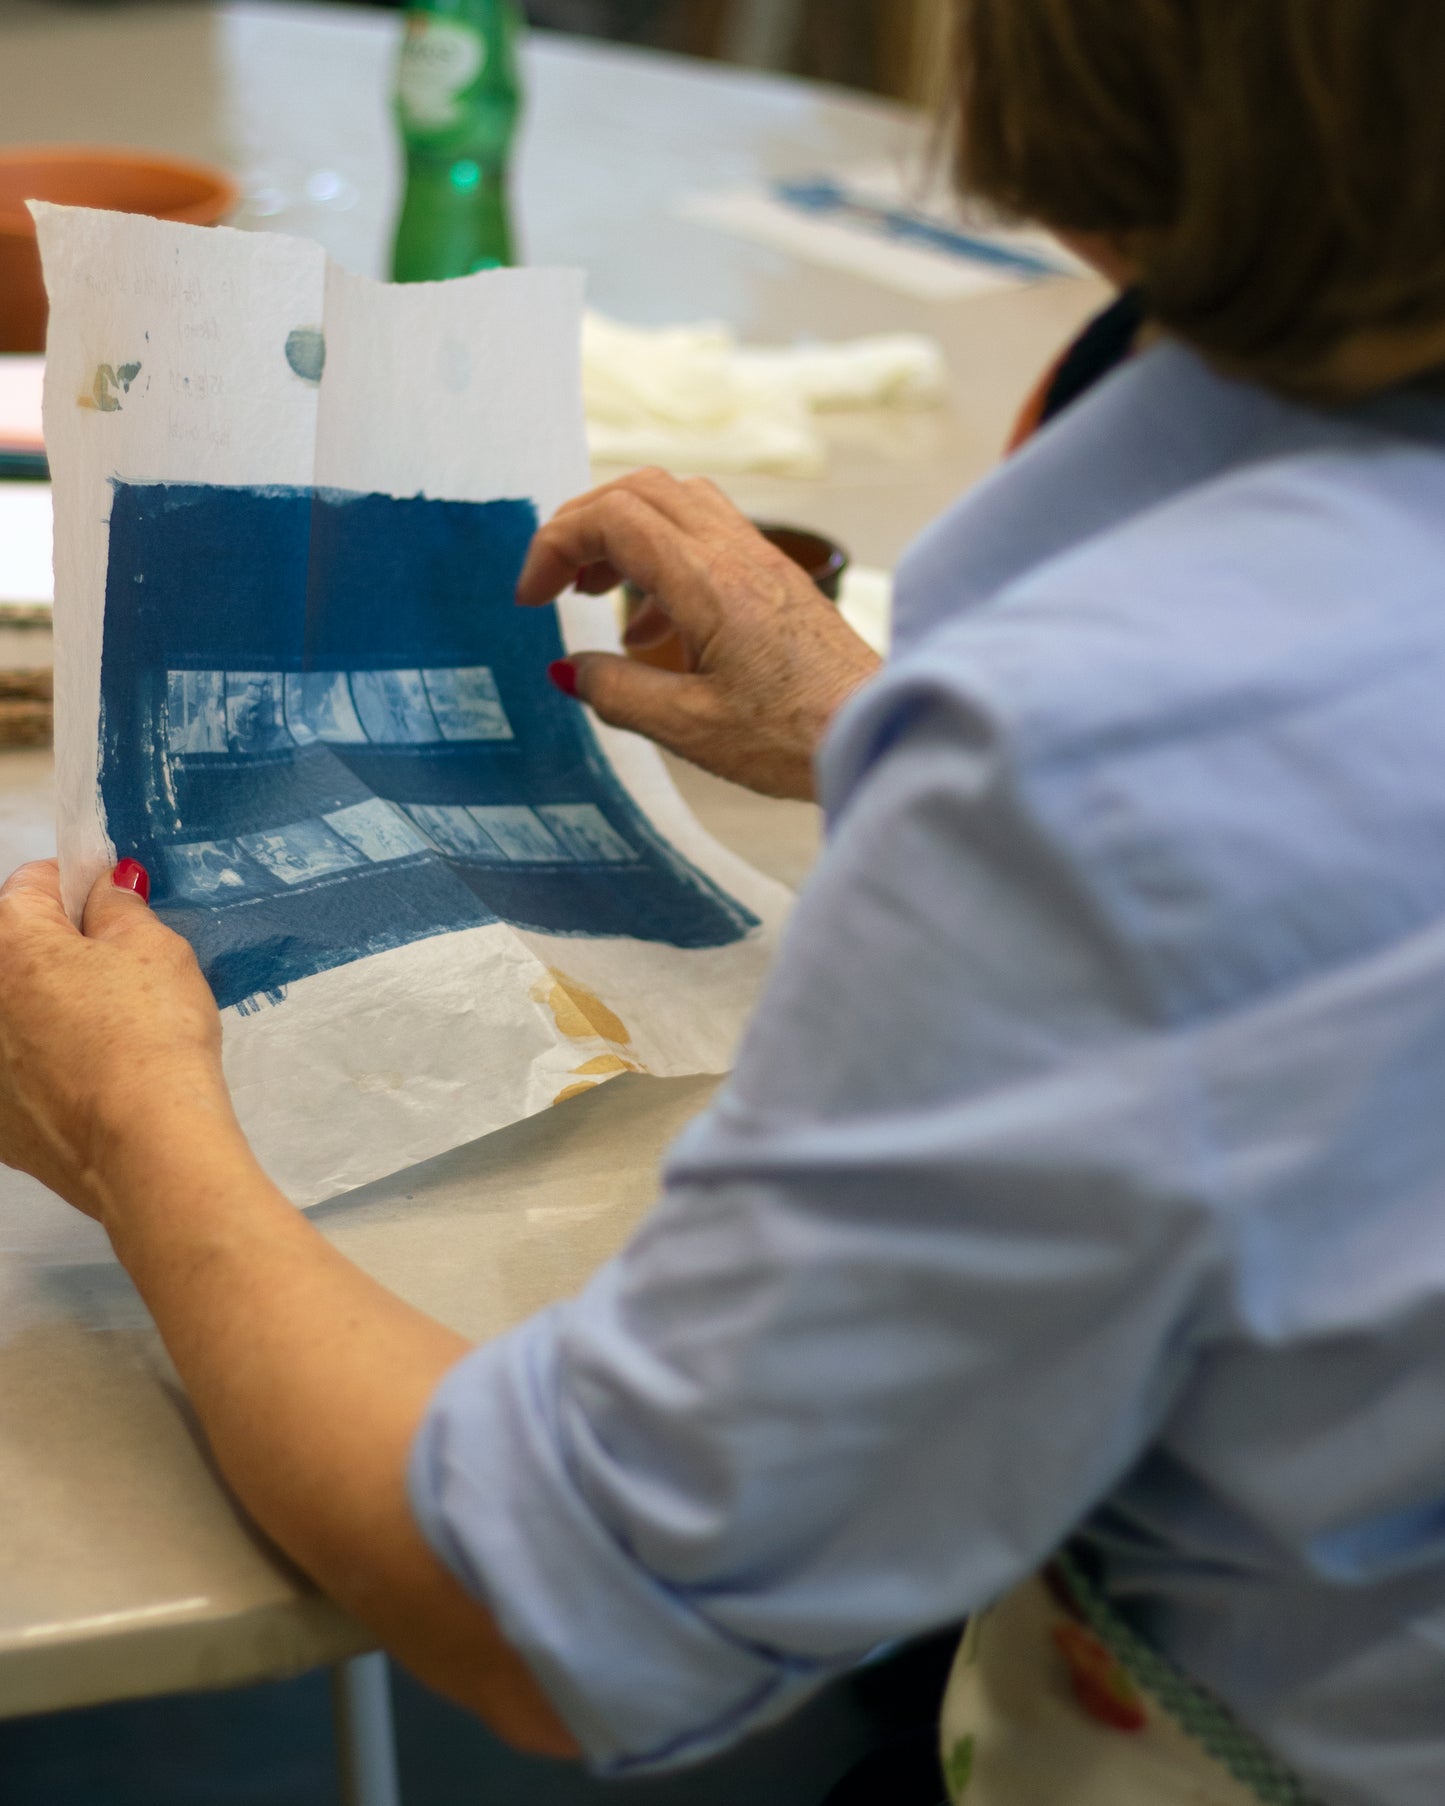 Cyanotype Workshop "Cyanotype on Paper and Fabric" with Inês in Porto, Portugal